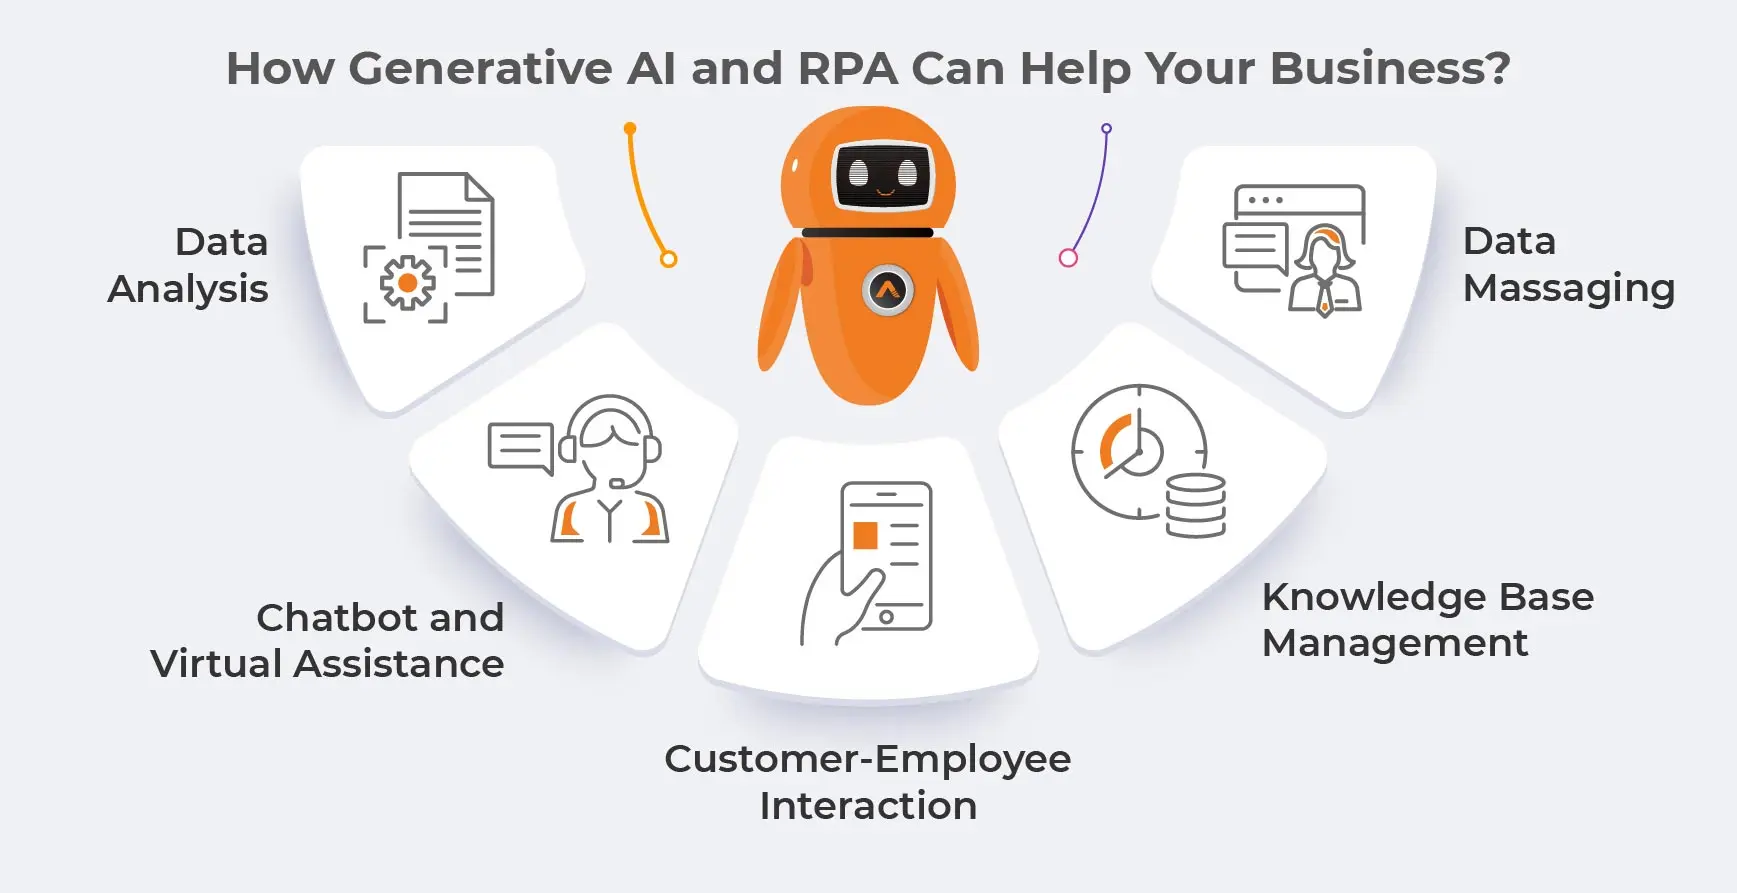 How Generative AI and RPA Can Help Your Business?